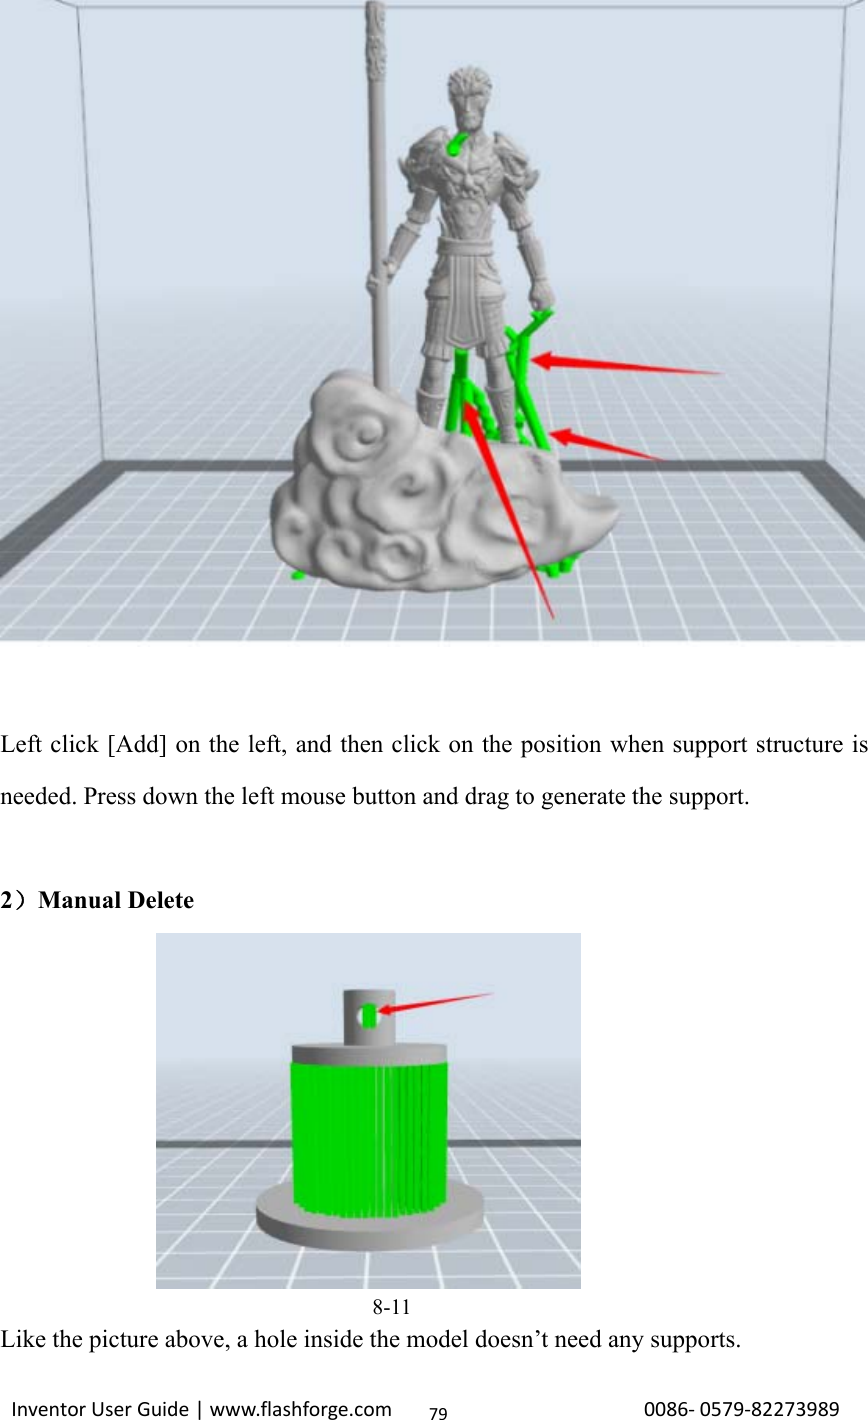 Inventor User Guide | www.flashforge.com 0086‐0579‐8227398979Left click [Add] on the left, and then click on the position when support structure isneeded. Press down the left mouse button and drag to generate the support.2）Manual Delete8-11Like the picture above, a hole inside the model doesn’t need any supports.